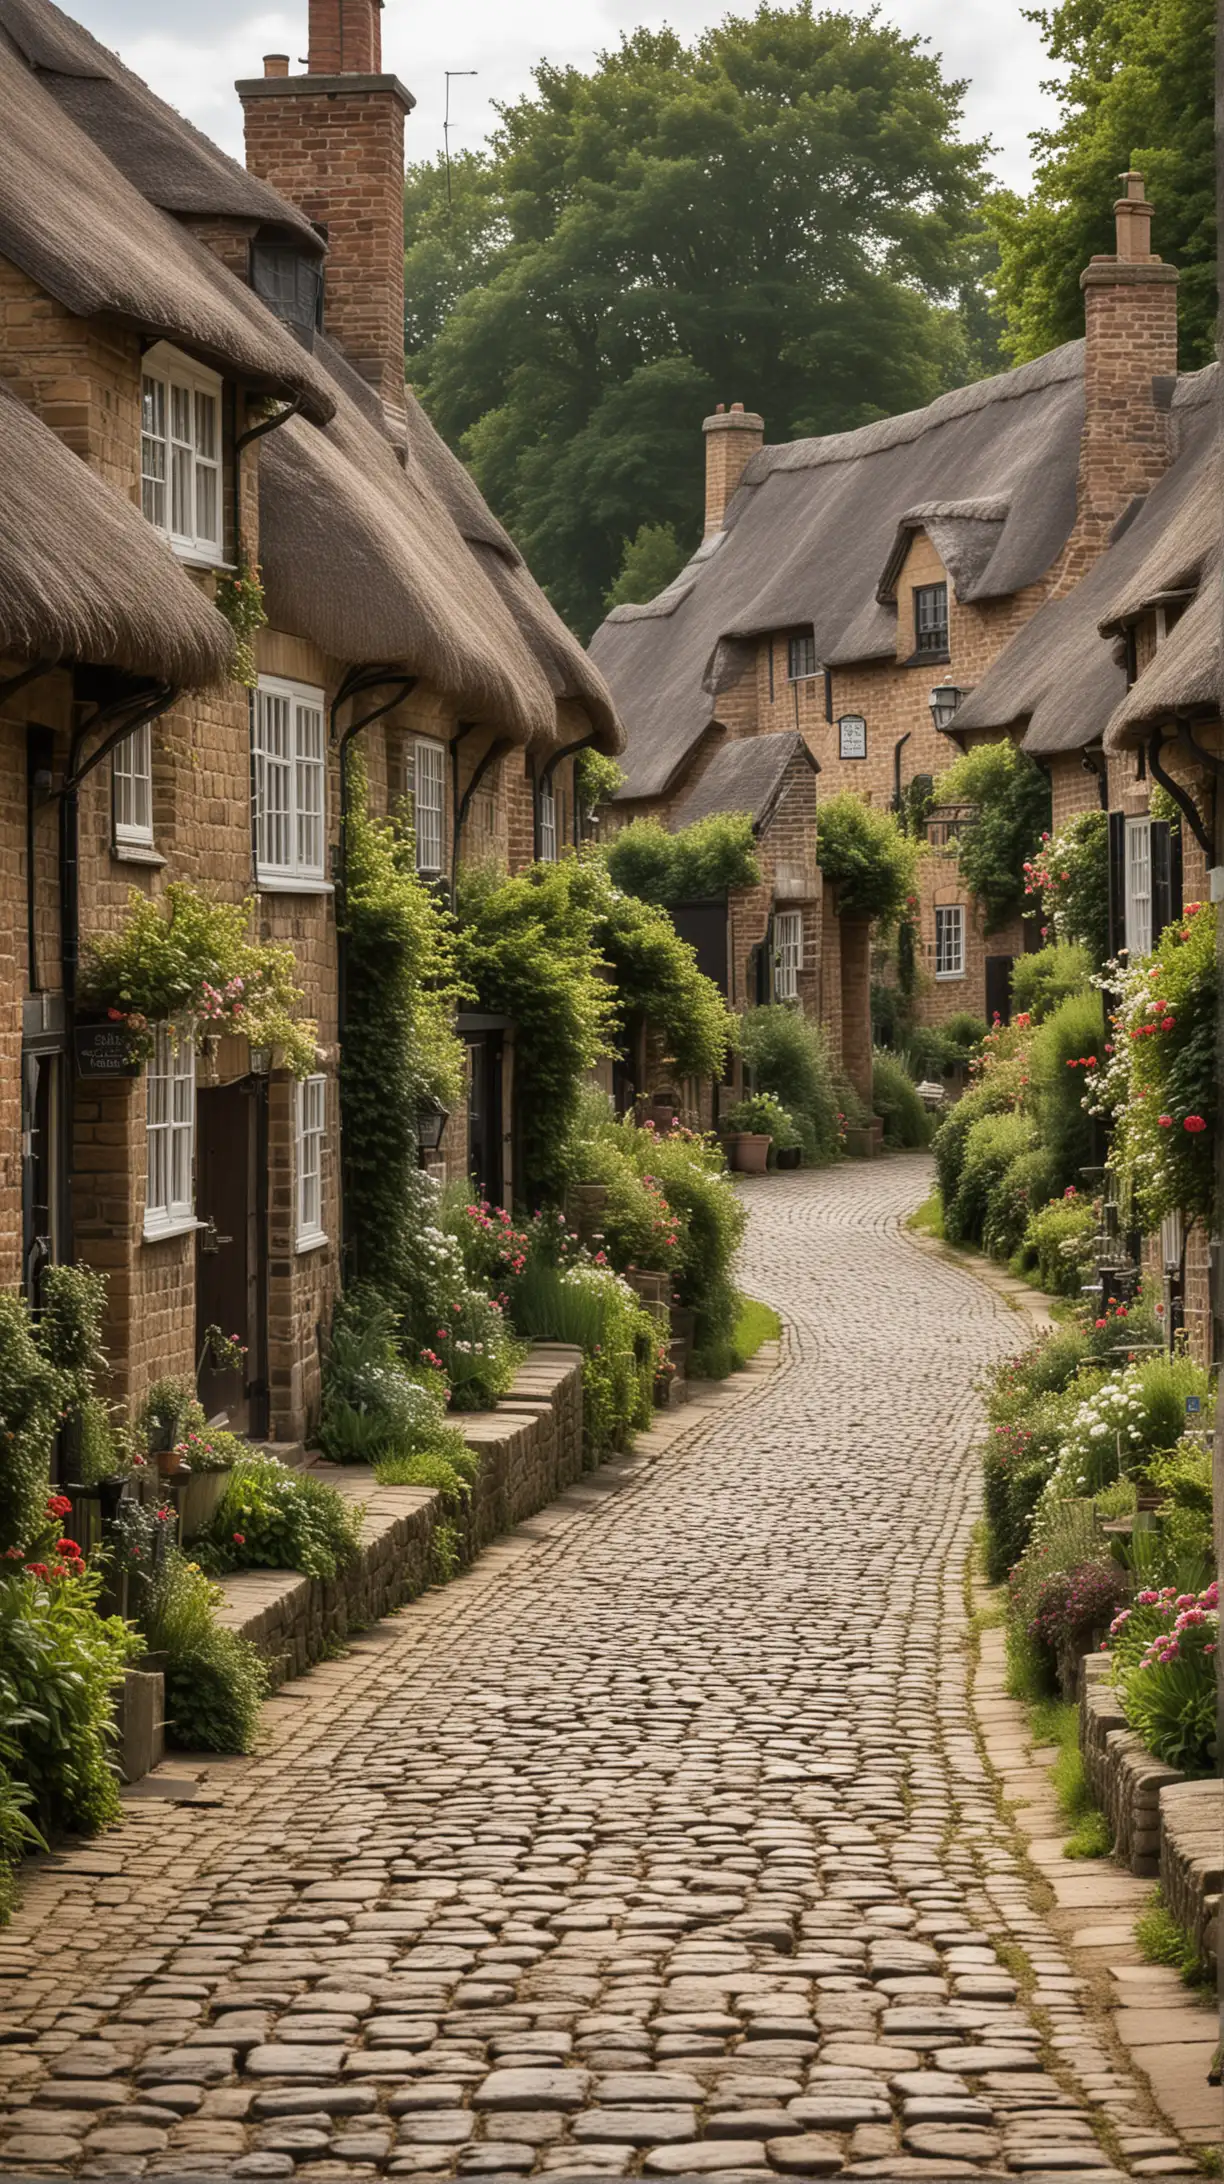 18th Century Quaint English Village with Cobblestone Streets and Thatched Cottages